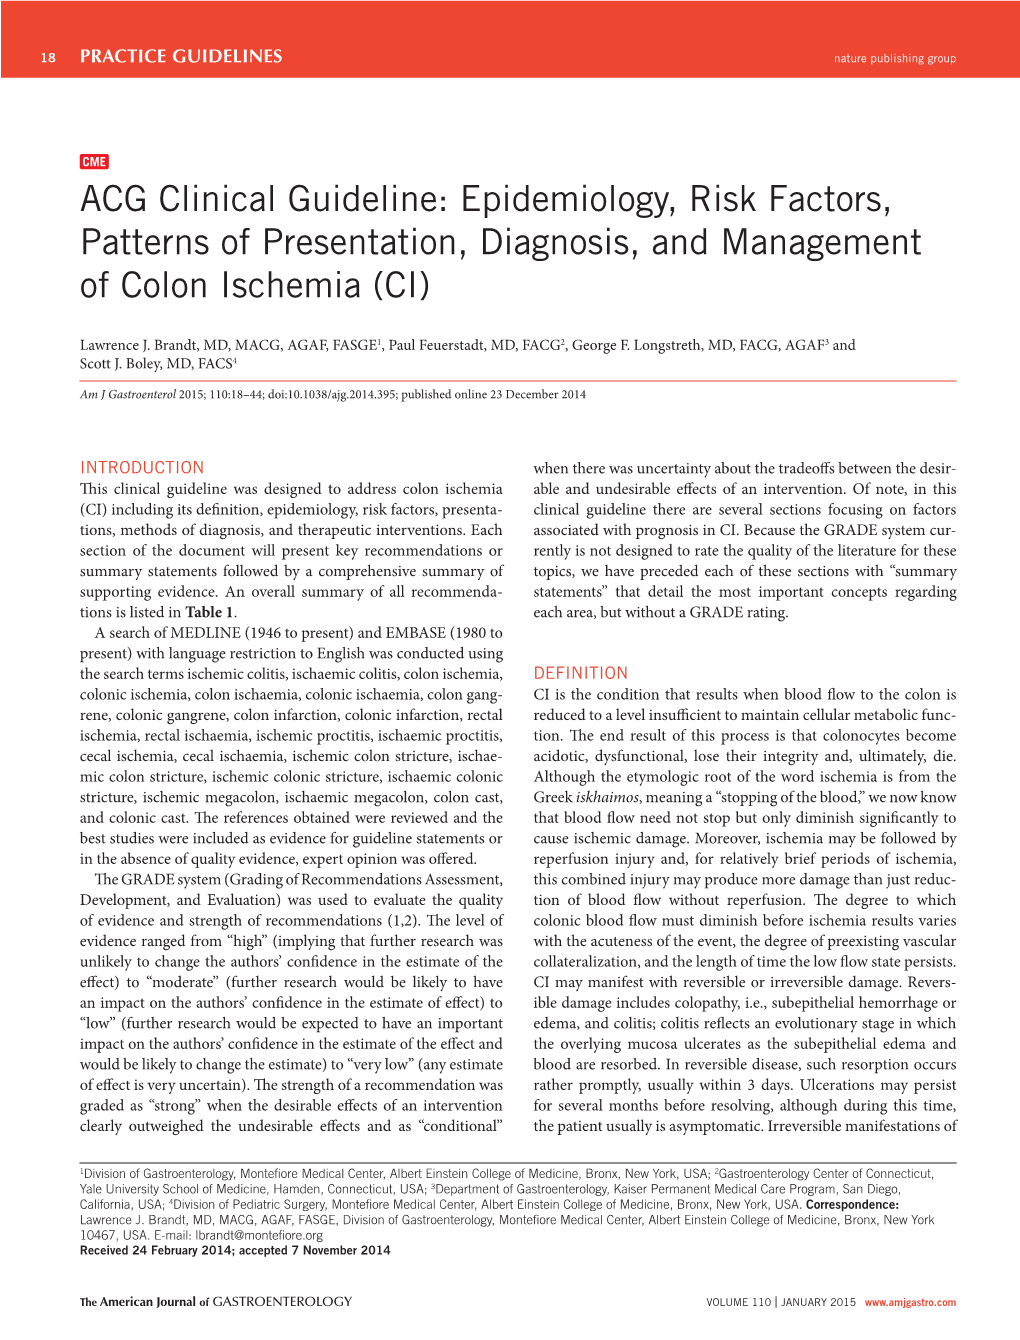 ACG Clinical Guideline: Epidemiology, Risk Factors, Patterns of Presentation, Diagnosis, and Management of Colon Ischemia (CI)